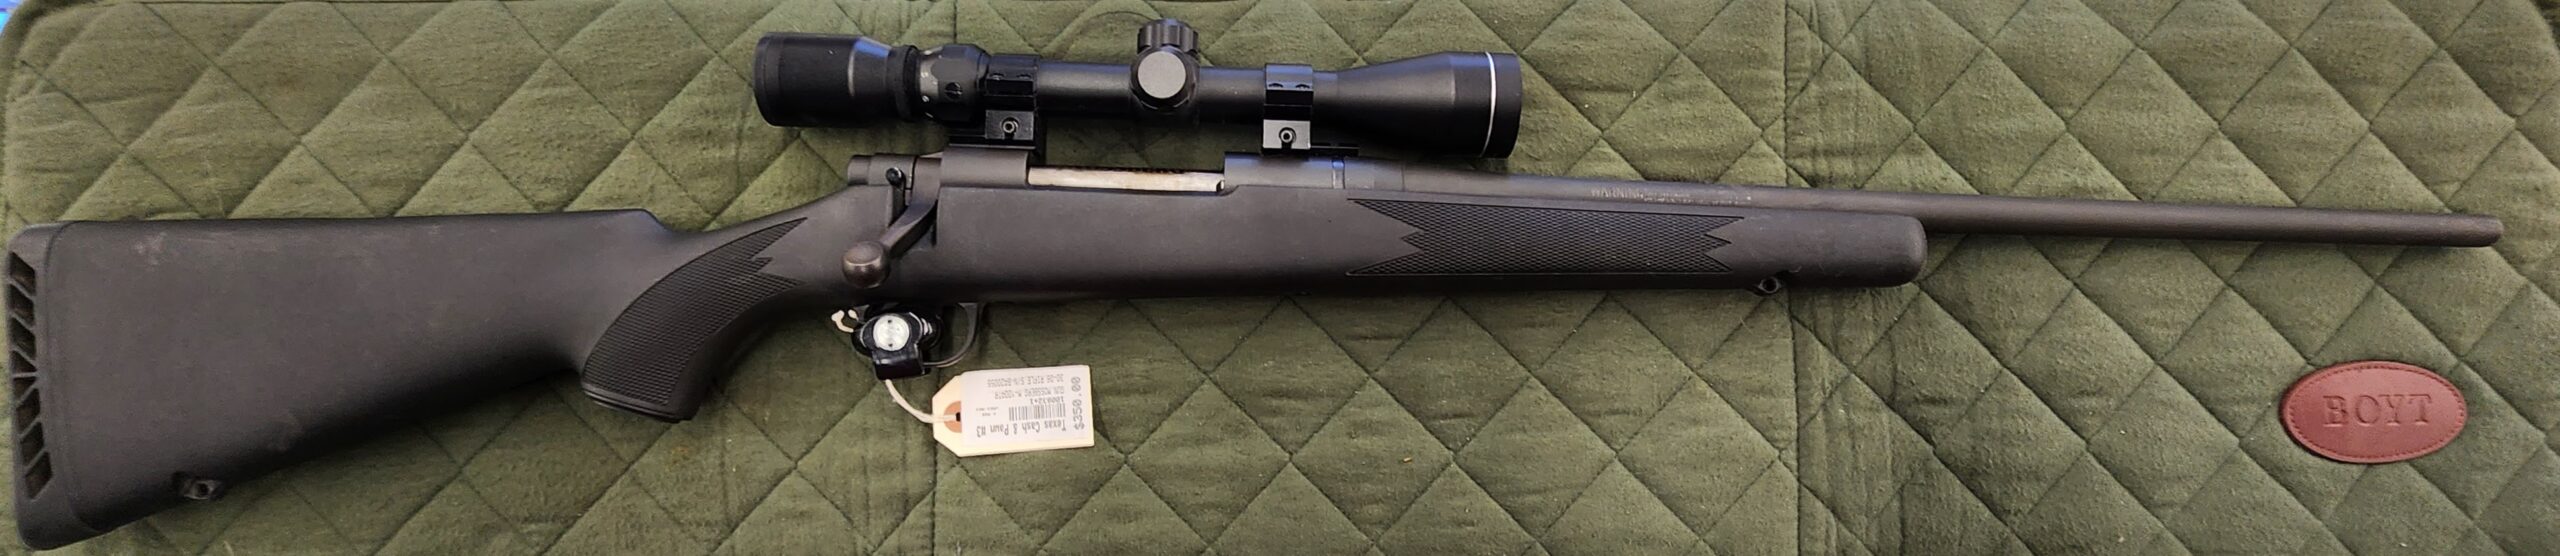 Mossberg 100atr 30 06 Texas Cash And Pawn Weatherford Texas Pawn Shop Graham Texas Pawn Shop 